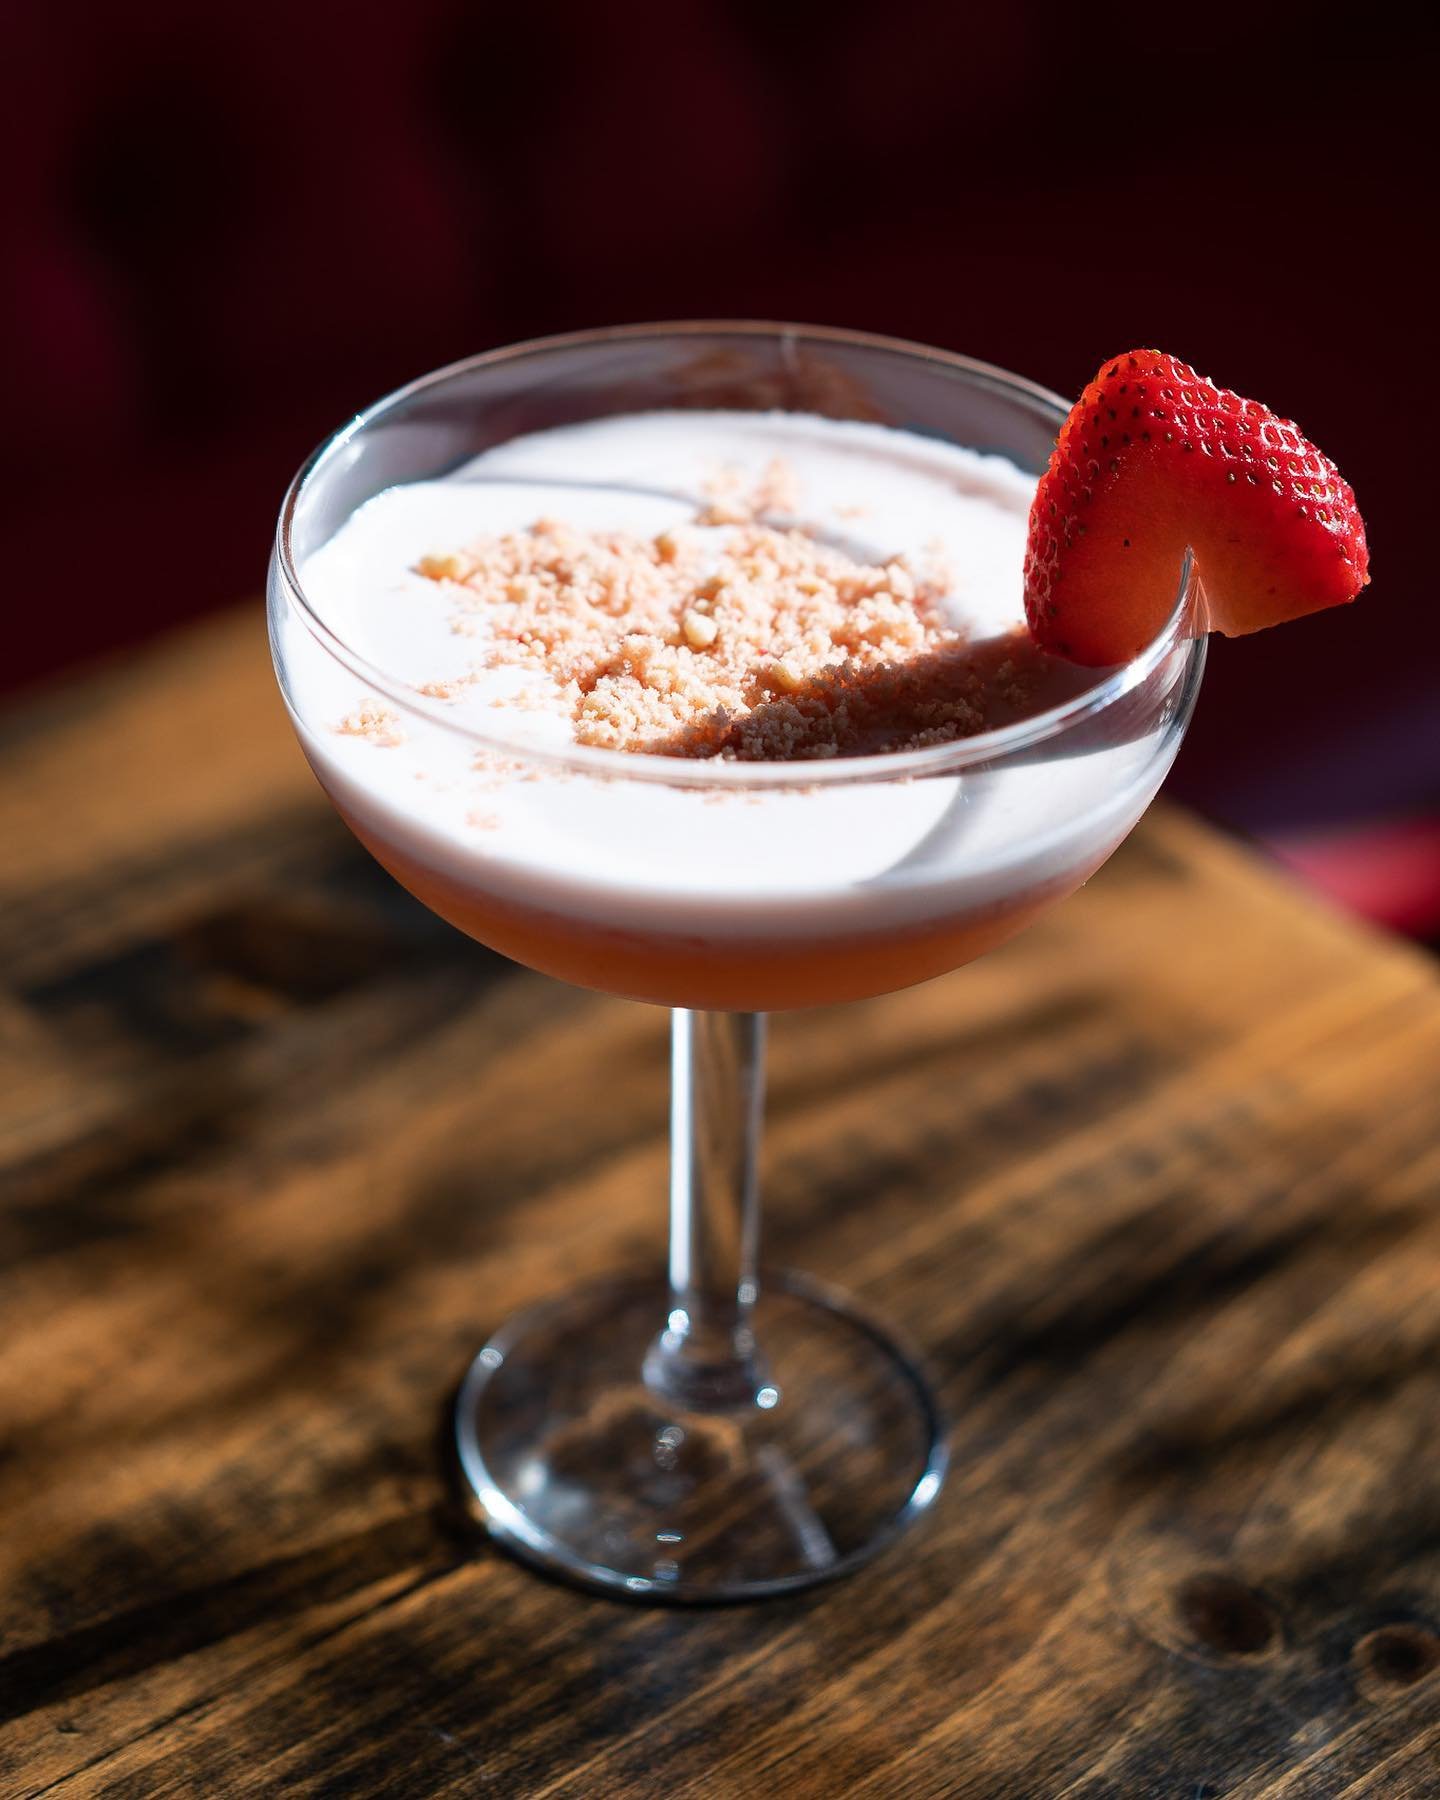 Stop by J's On The Bay to try our Strawberry Cheesecake Cocktail! Our cocktails are loaded with flavor and go well with our dinner menu. Our team is sure to make a cocktail so unique and delicious, you'll want to host all your Girls Nights here! So s